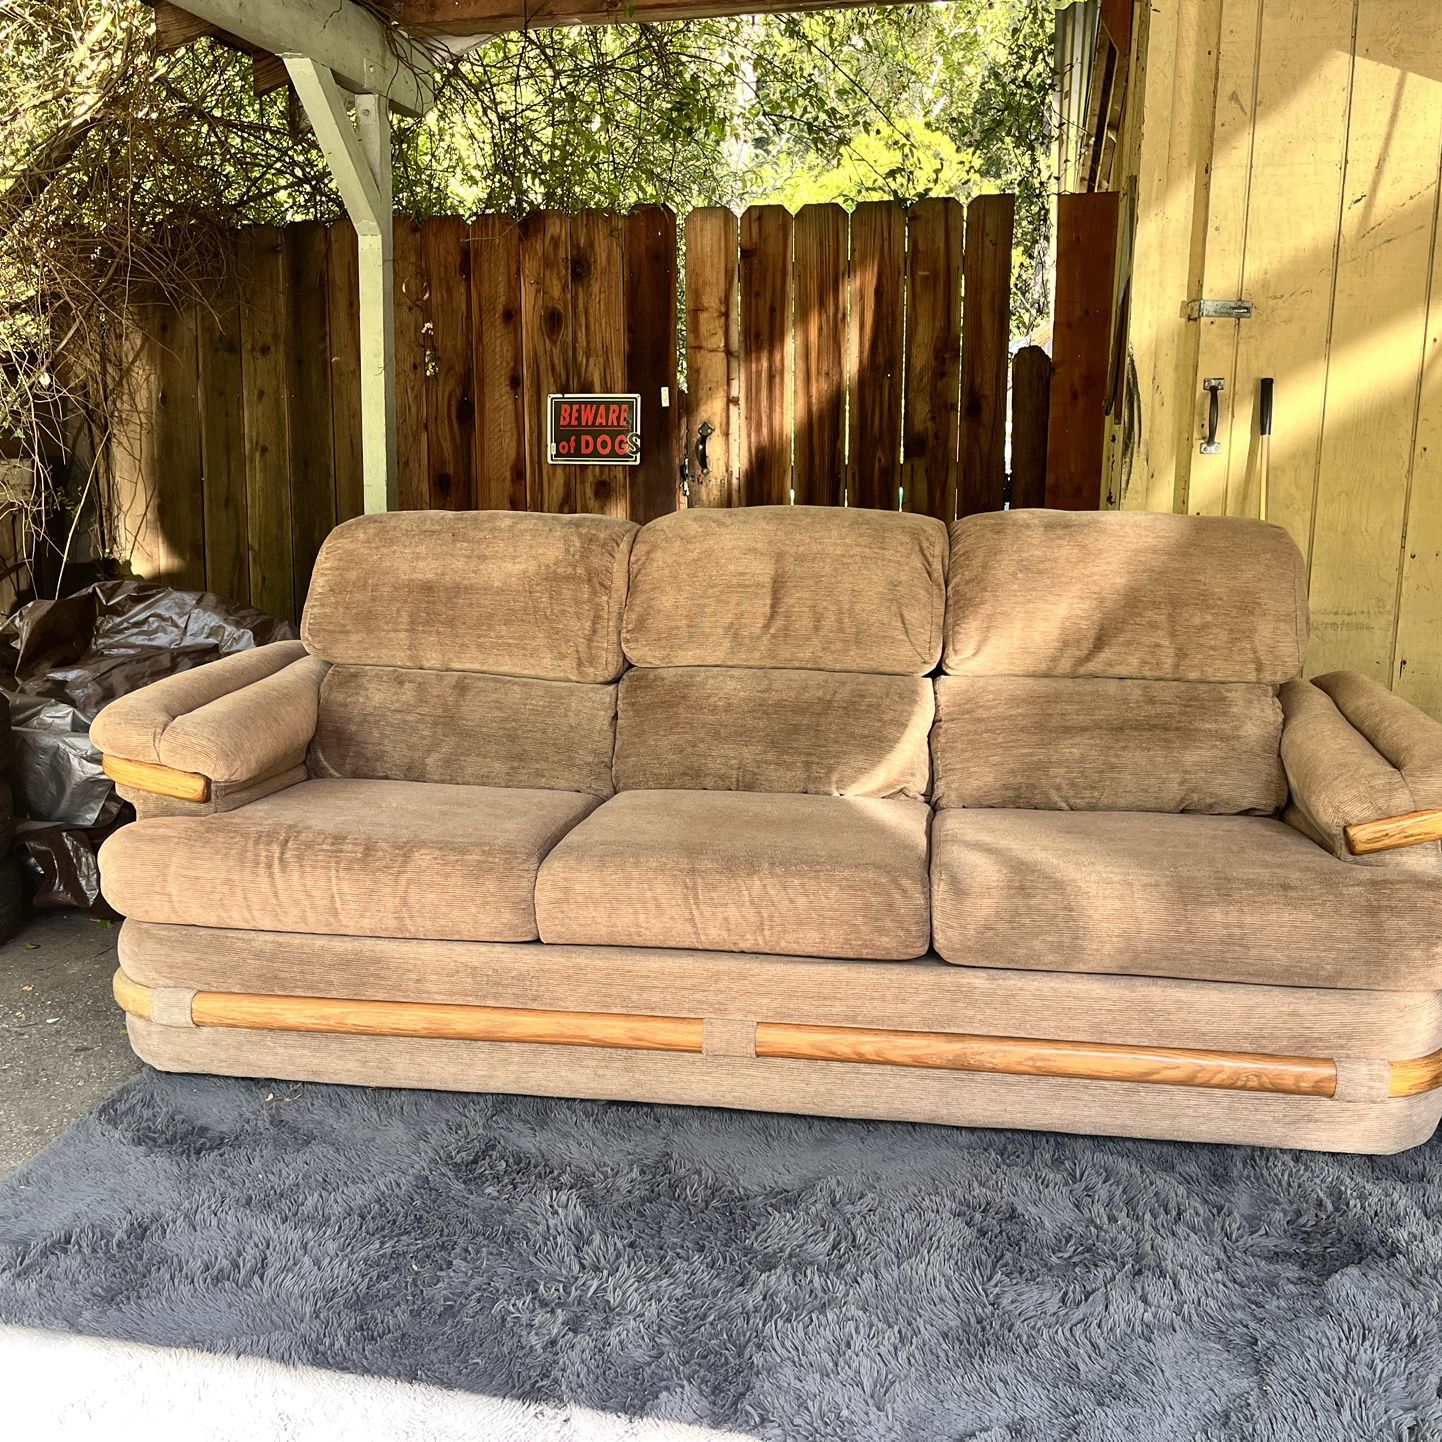 FREE DELIVERY) Brown Sofa